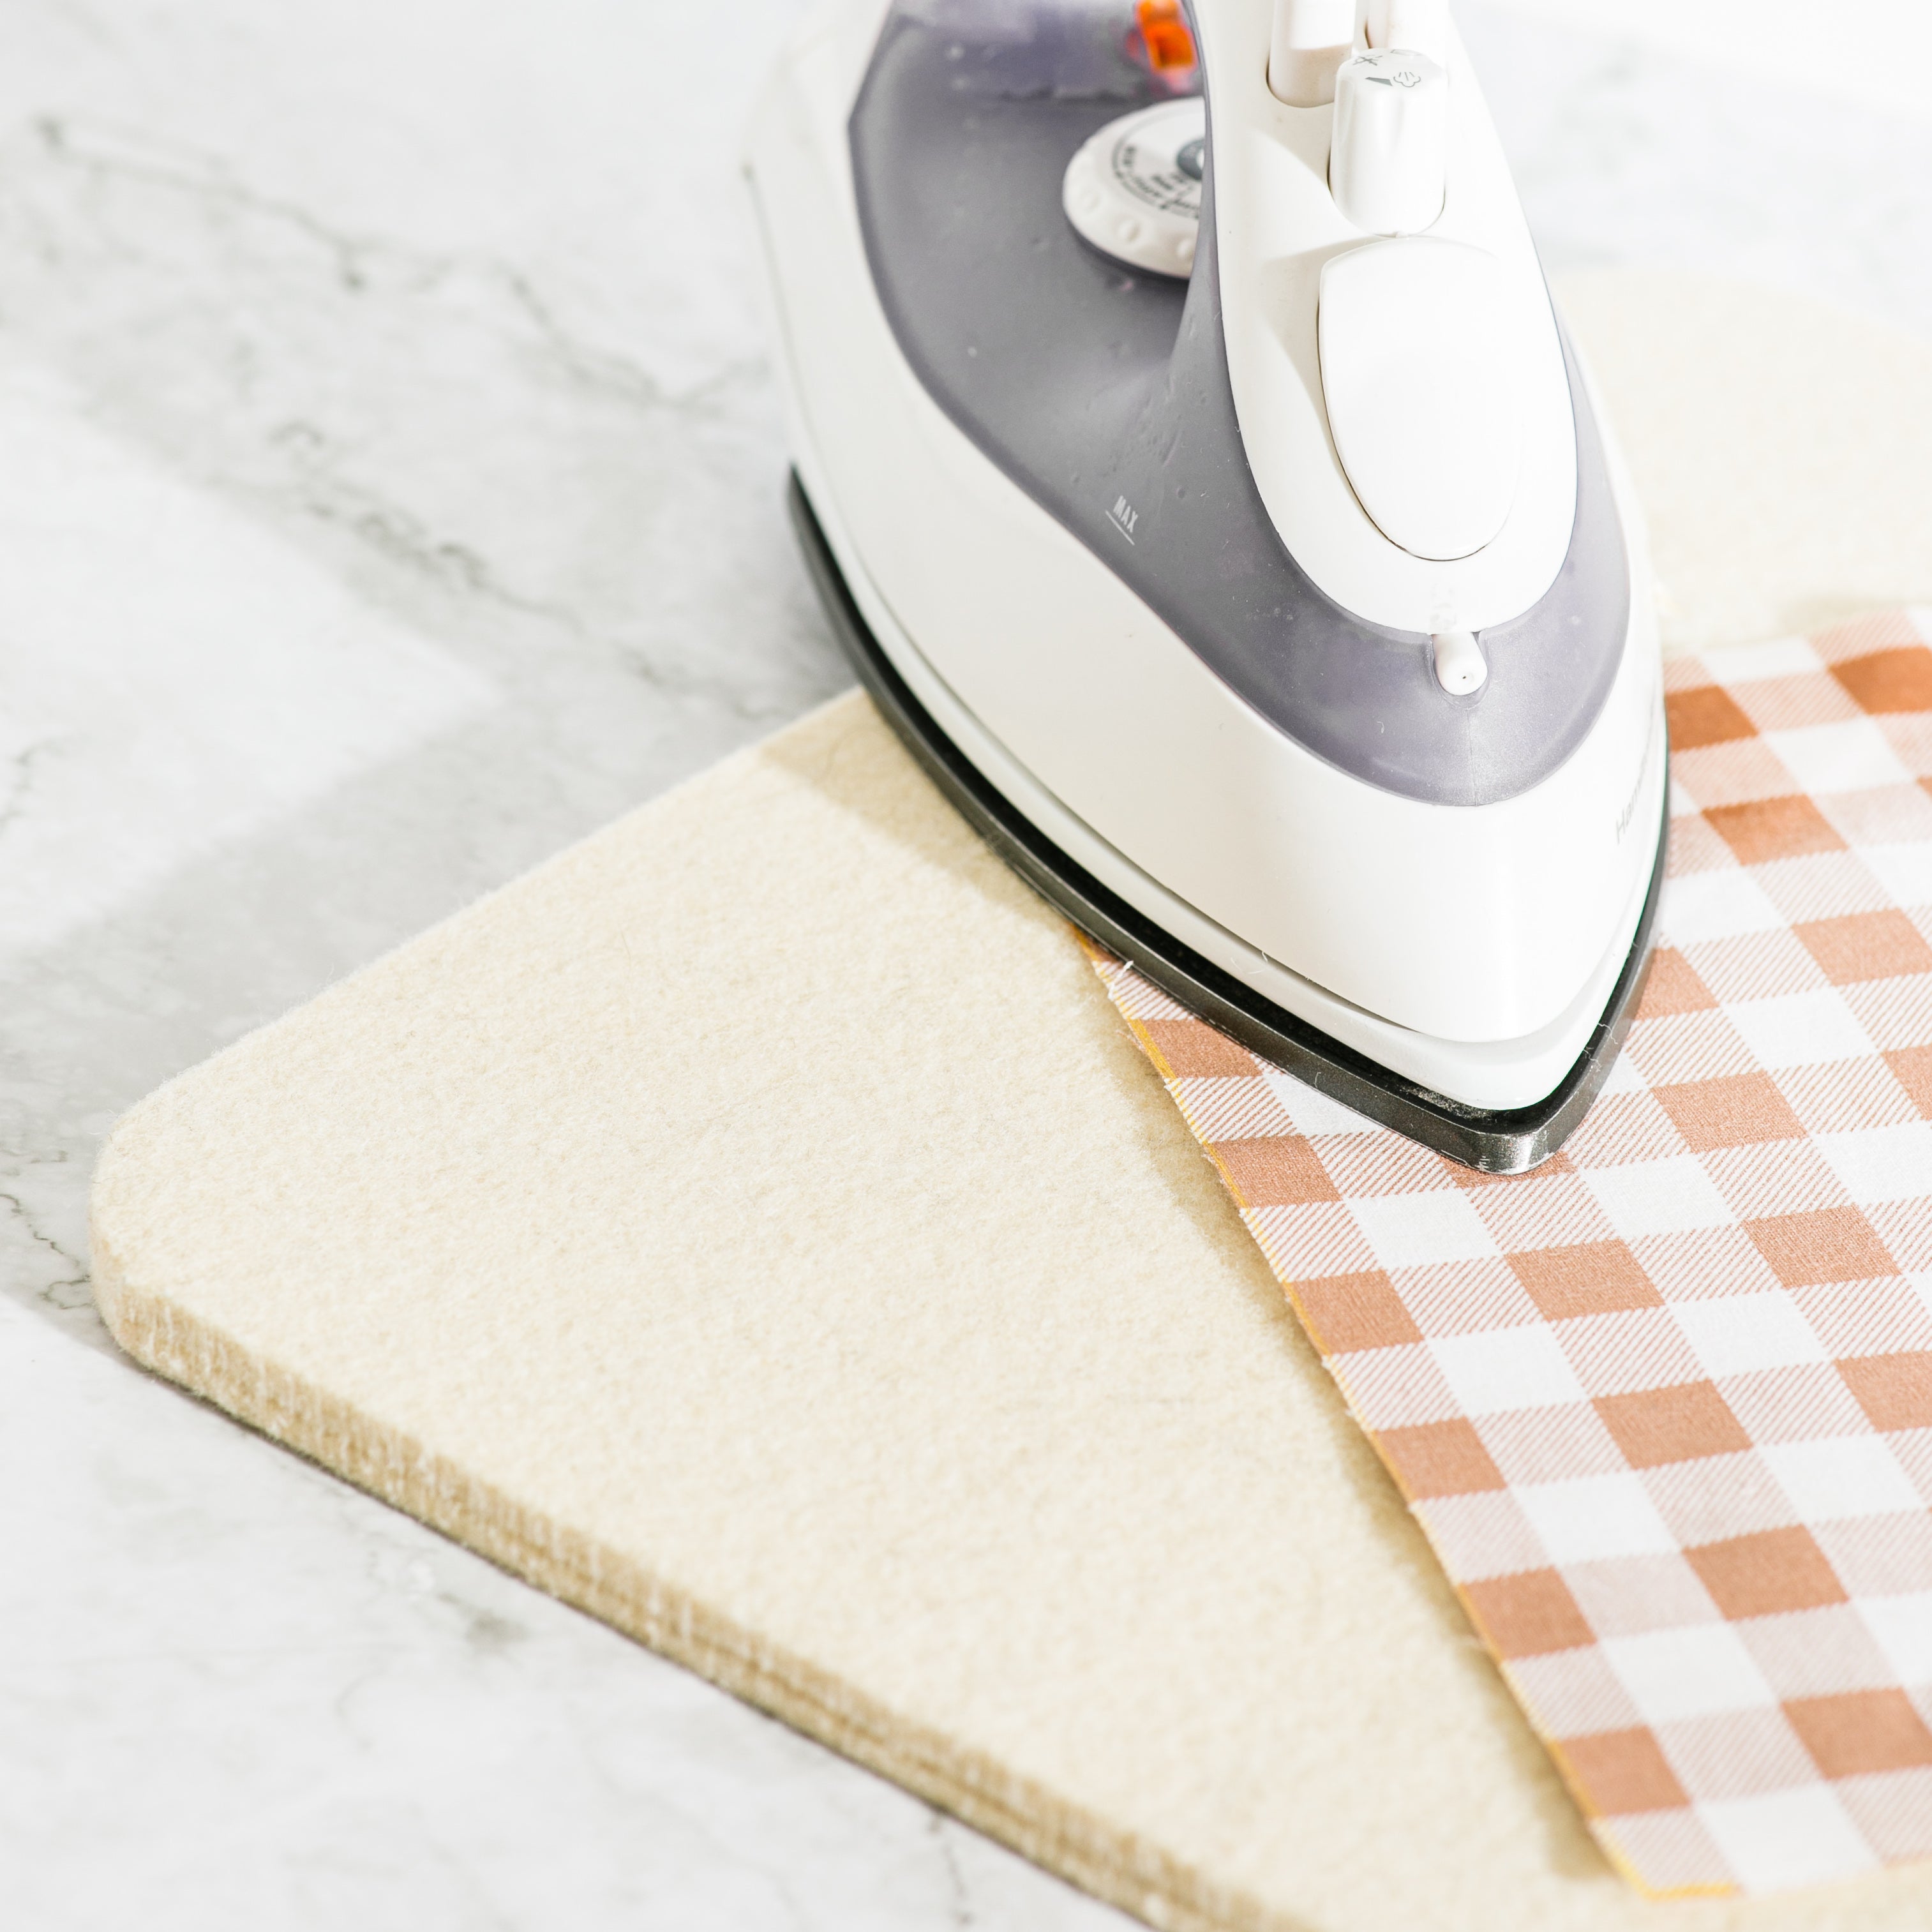 How to Sew an Ironing Pad